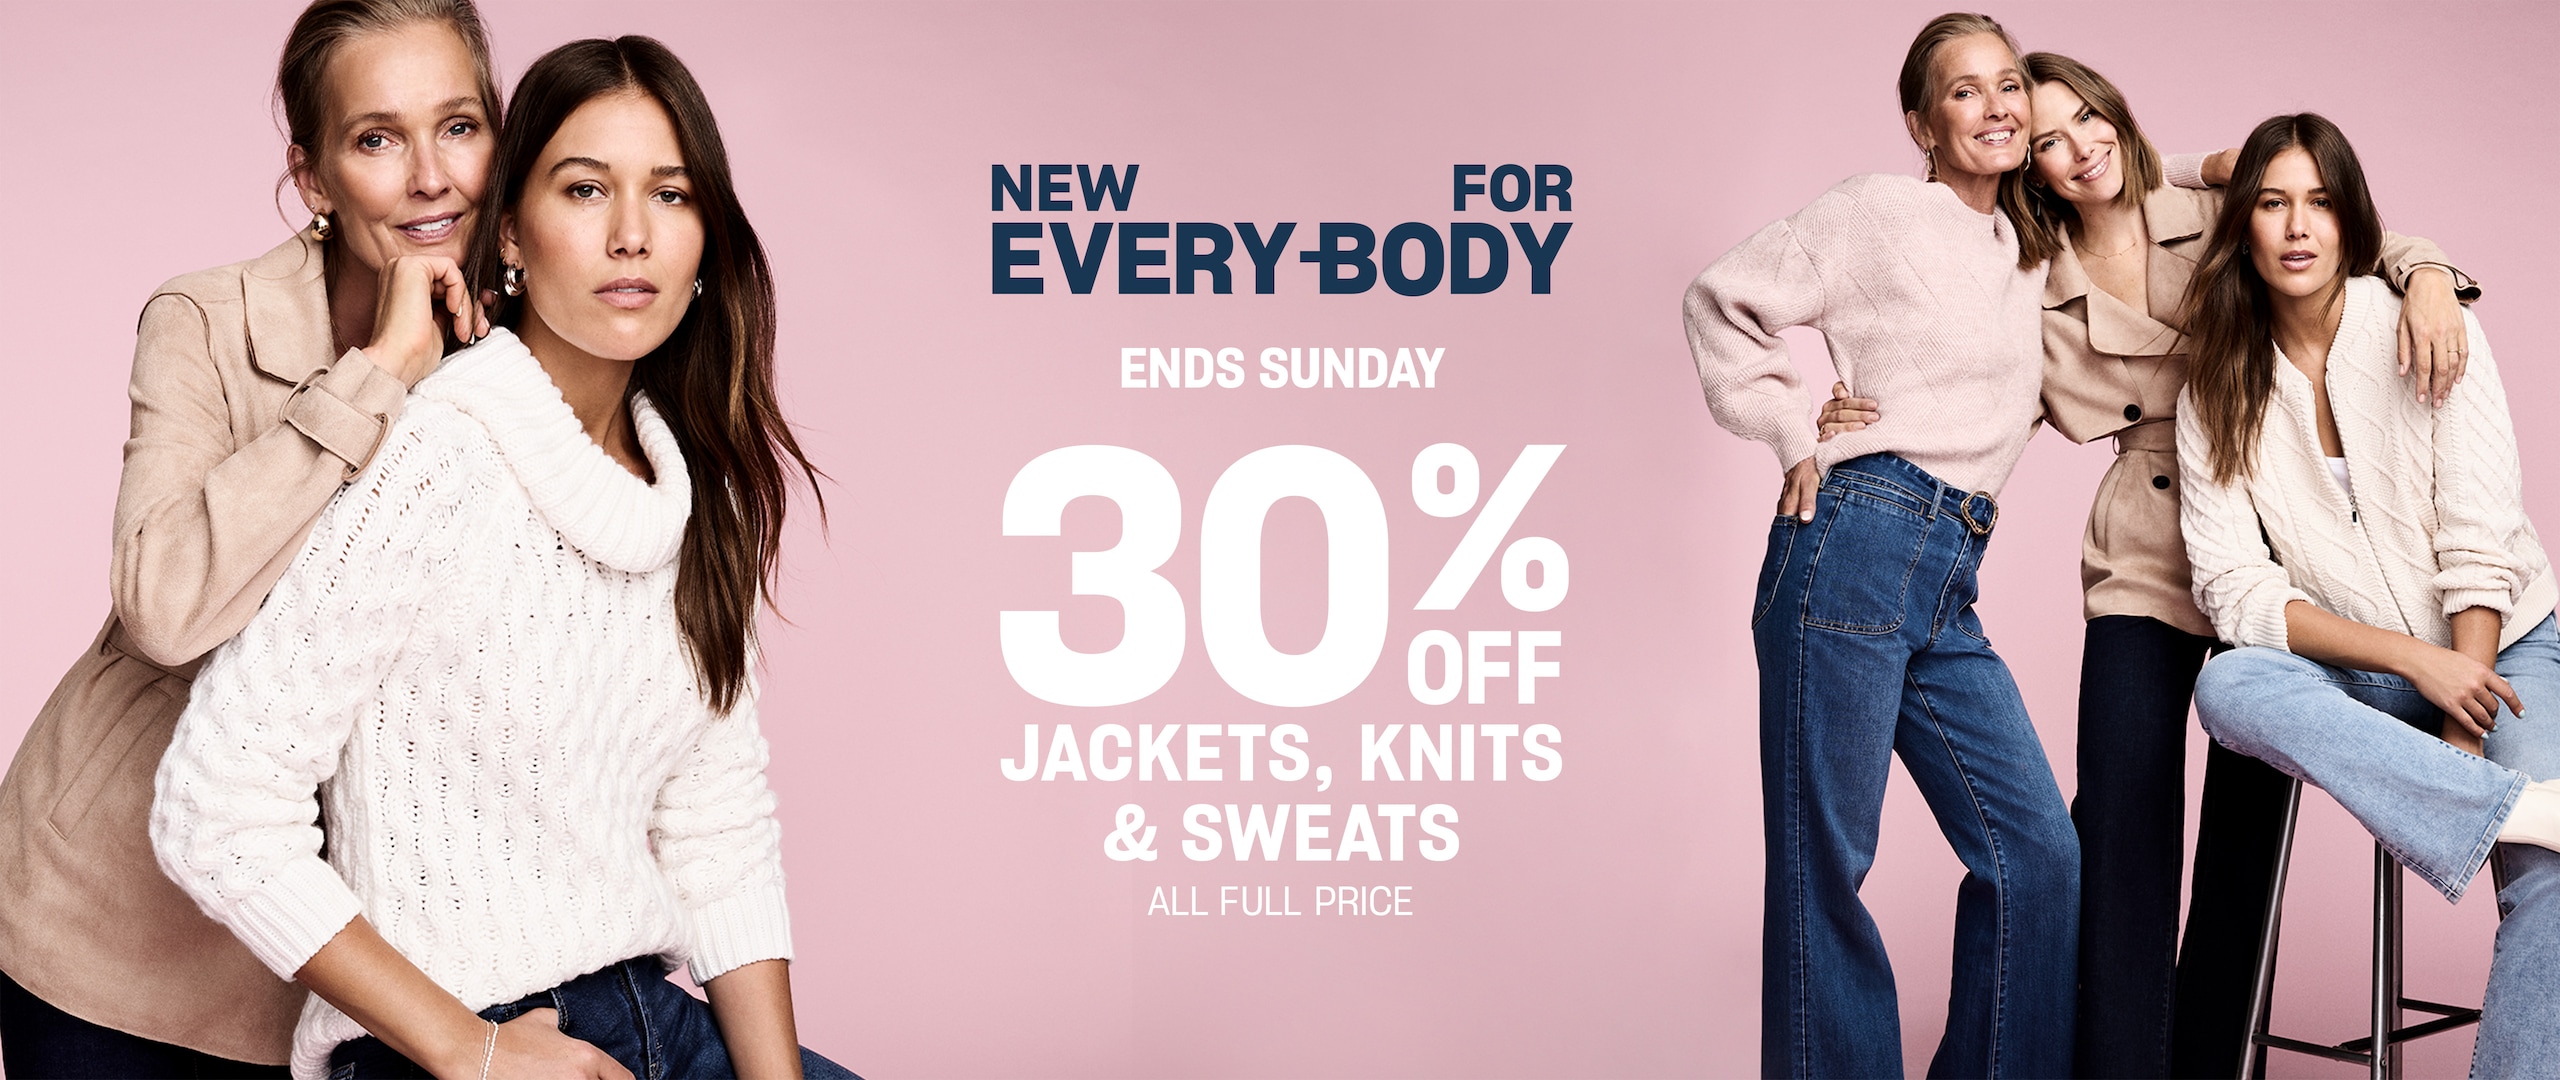 Fit For Everybody. 30% Off Jackets, Knits & Sweats. All Full Price. Ends Sunday.